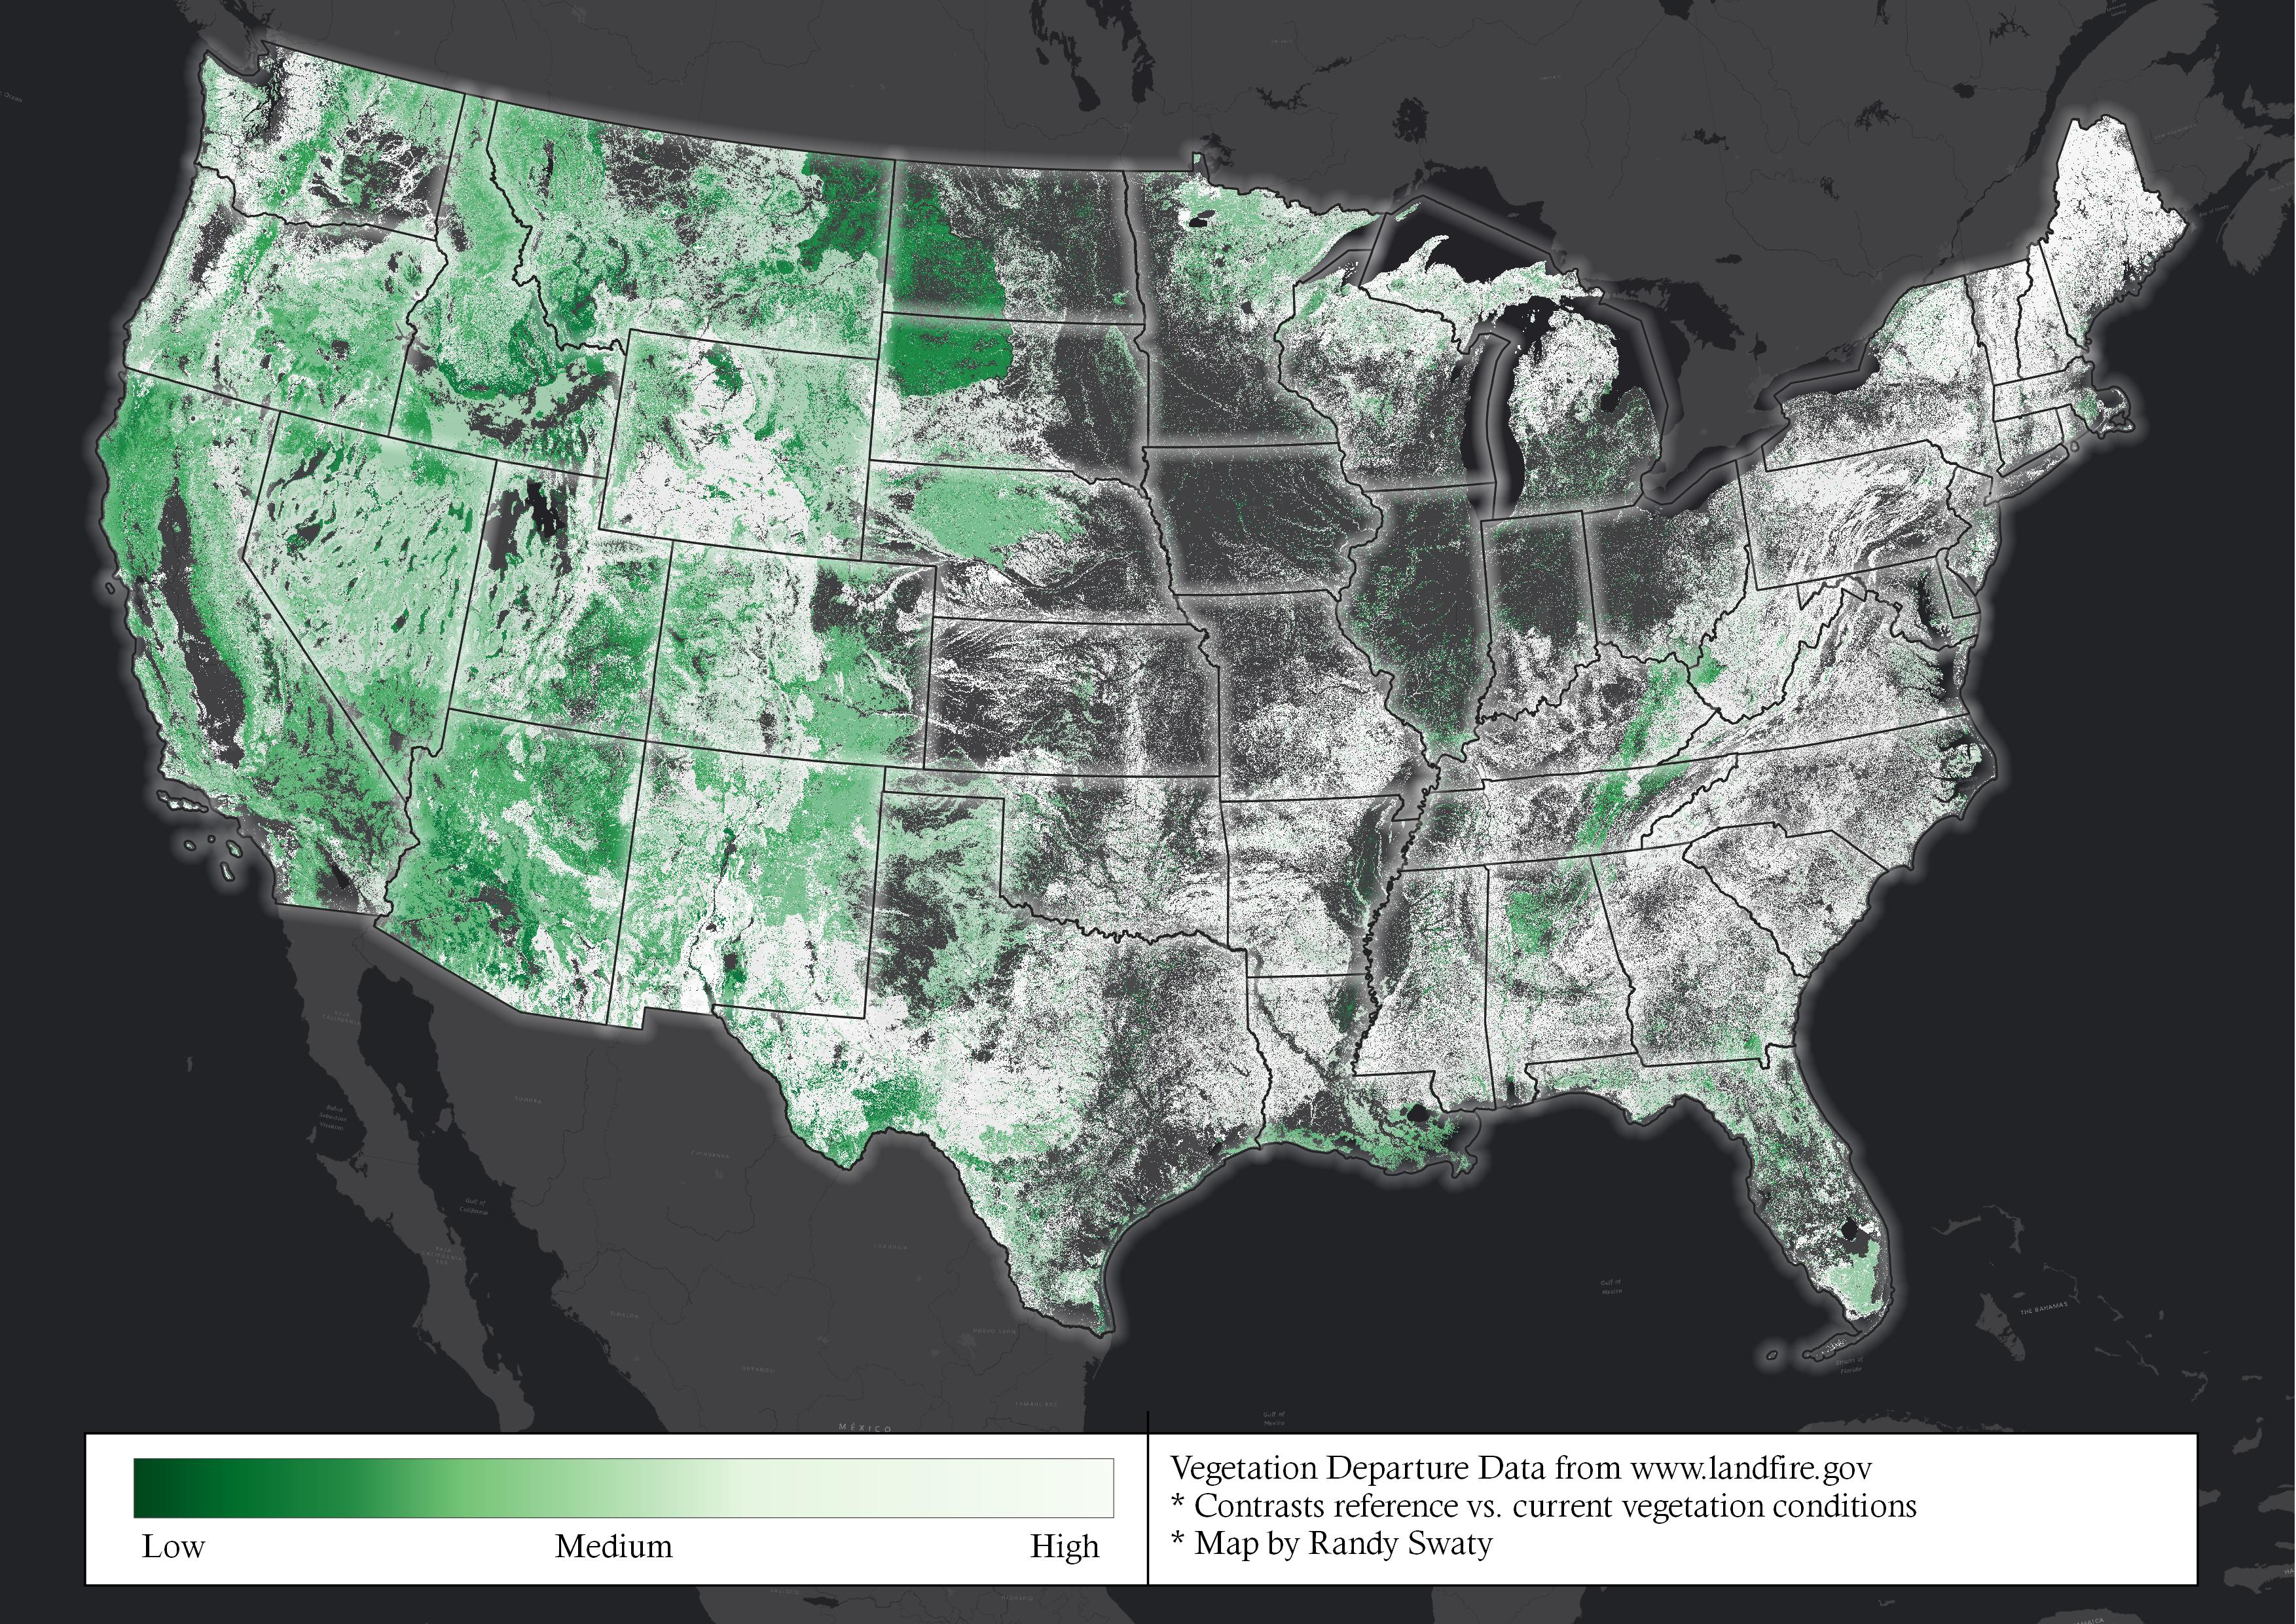 LANDFIRE's Vegetation Departure.  Green areas represent low levels of Vegetation Departure, white areas high levels, and black represents urban and agricultural land use, and water. 